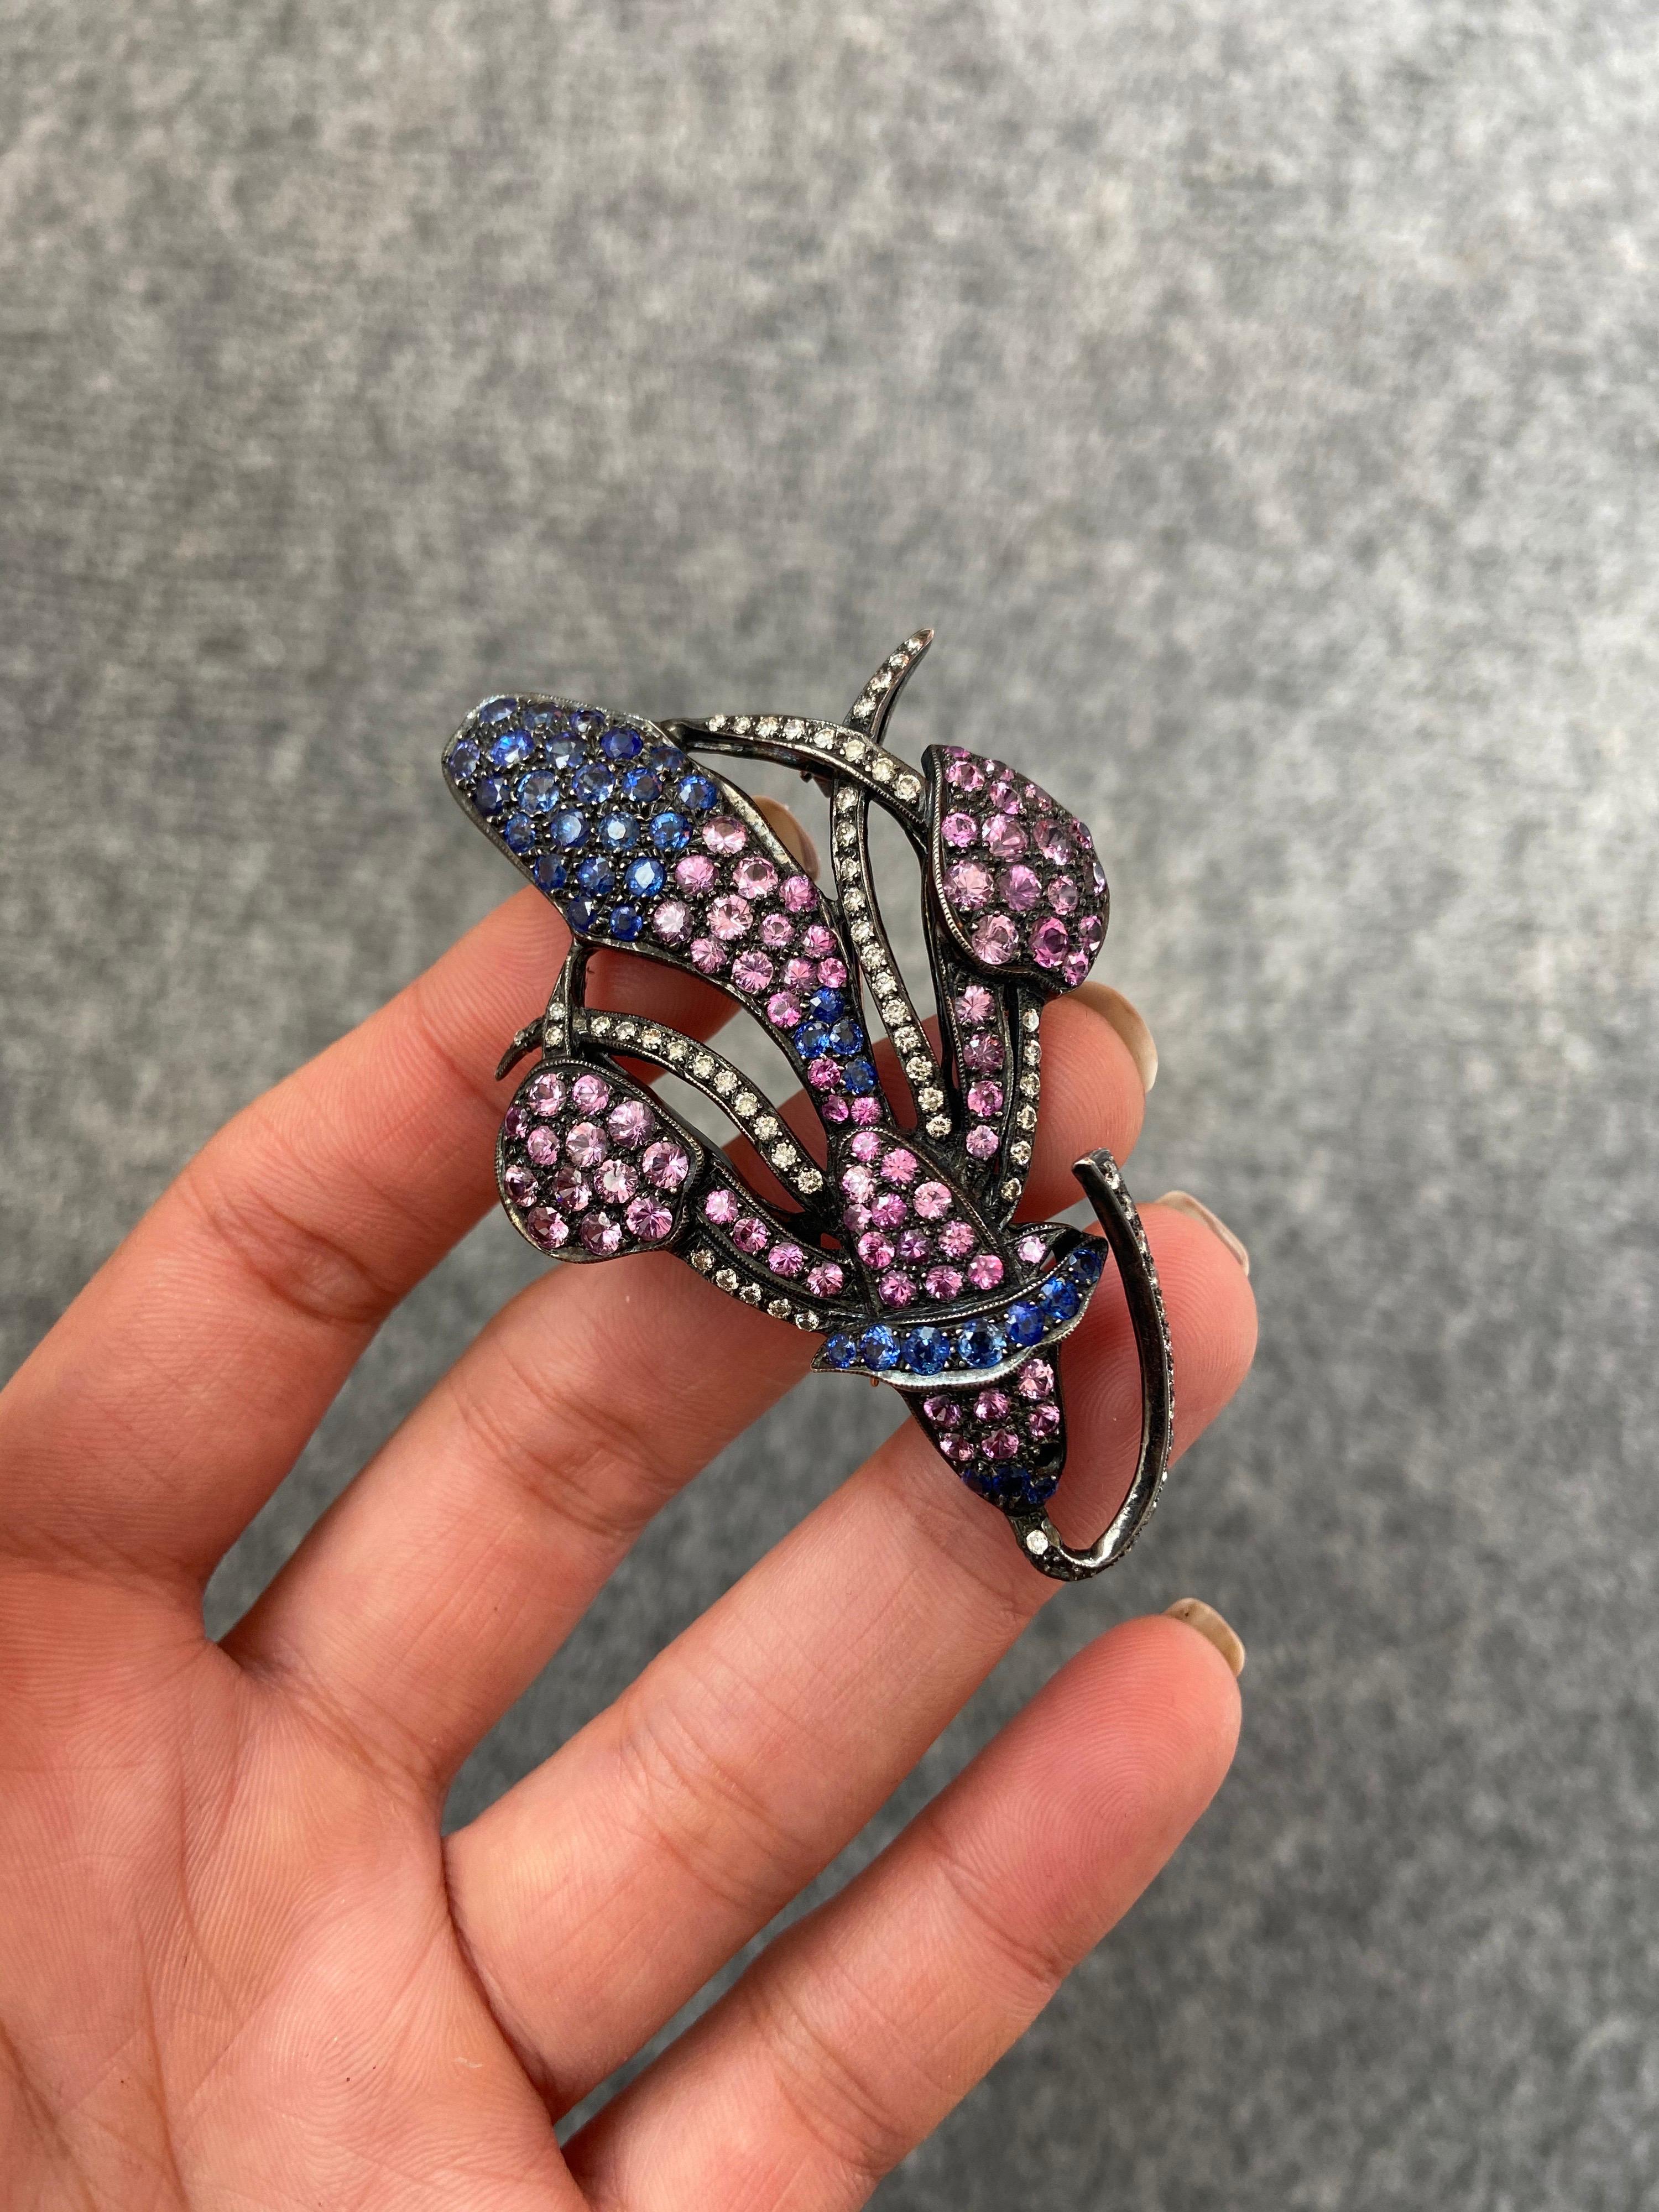 A beautiful, antique looking coloured sapphire and diamond brooch, set in silver. 
There are around 4.8 carats of pink sapphire, 2.2 carats of blue sapphire, and 0.9 carats of diamonds used in this piece. 